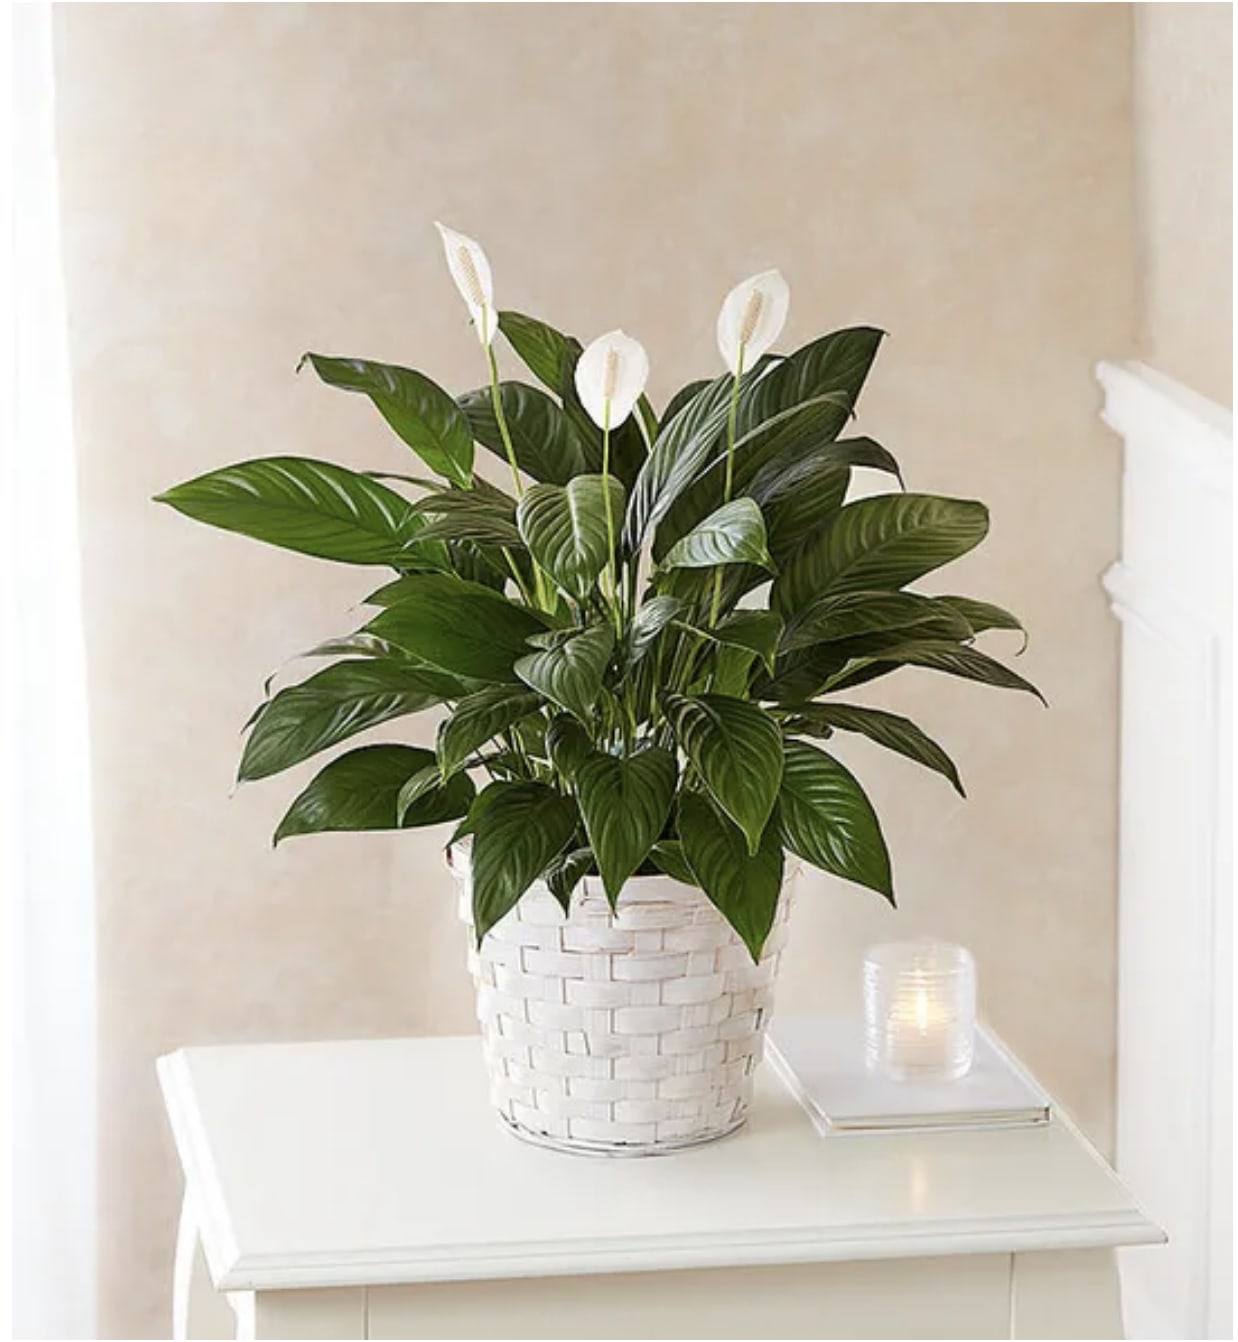 Peace Lily Plant | Spathiphyllum - Like many plants, peace lilies carry symbolism. The peace lily's meaning is associated with sympathy, healing, hope, purity, and—naturally—peace. The plant is commonly given as a gift to those who have lost a loved one.  Its broad, dark green leaves, tall stem and white bracts create a calming presence in any space, while serving as a warm reminder that even though someone may be gone, their memory lives on.  This beautiful Peace Lily plant (Spathiphyllum) will bring elegance and content to any home. As well as being a certified peace symbol — thanks to their striking white flowers — they are also renowned for their air-purifying abilities. People often gift this plant as a sign of everlasting life to people facing loss or hardship.  Easy to care for, this indoor plant prefers partial shade and just a touch of water. They make a pretty addition to any bedroom, and improve air quality.  Note that peace lilies are toxic to pets and people if ingested,  so be mindful about where you place a peace lily in your house.  Please Note: Plants are living things; each one is slightly different, so the plant you receive may vary from the photo. This plant is delivered in a 10-inch diameter planter pot for easy transport and repotting.  Approx Dimensions: 36&quot; H